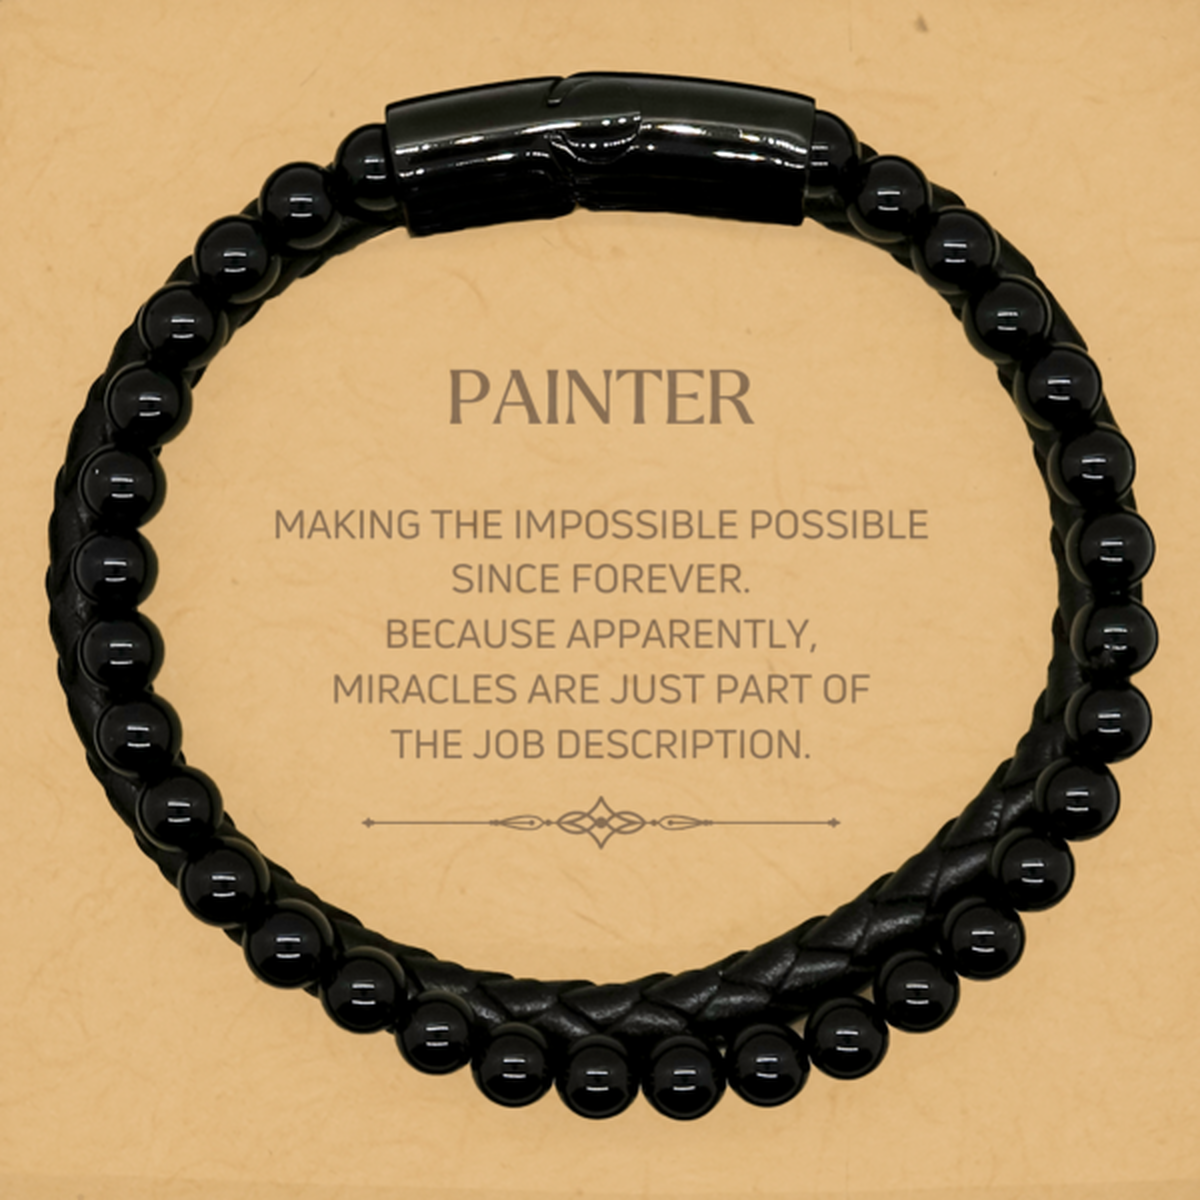 Funny Painter Gifts, Miracles are just part of the job description, Inspirational Birthday Stone Leather Bracelets For Painter, Men, Women, Coworkers, Friends, Boss